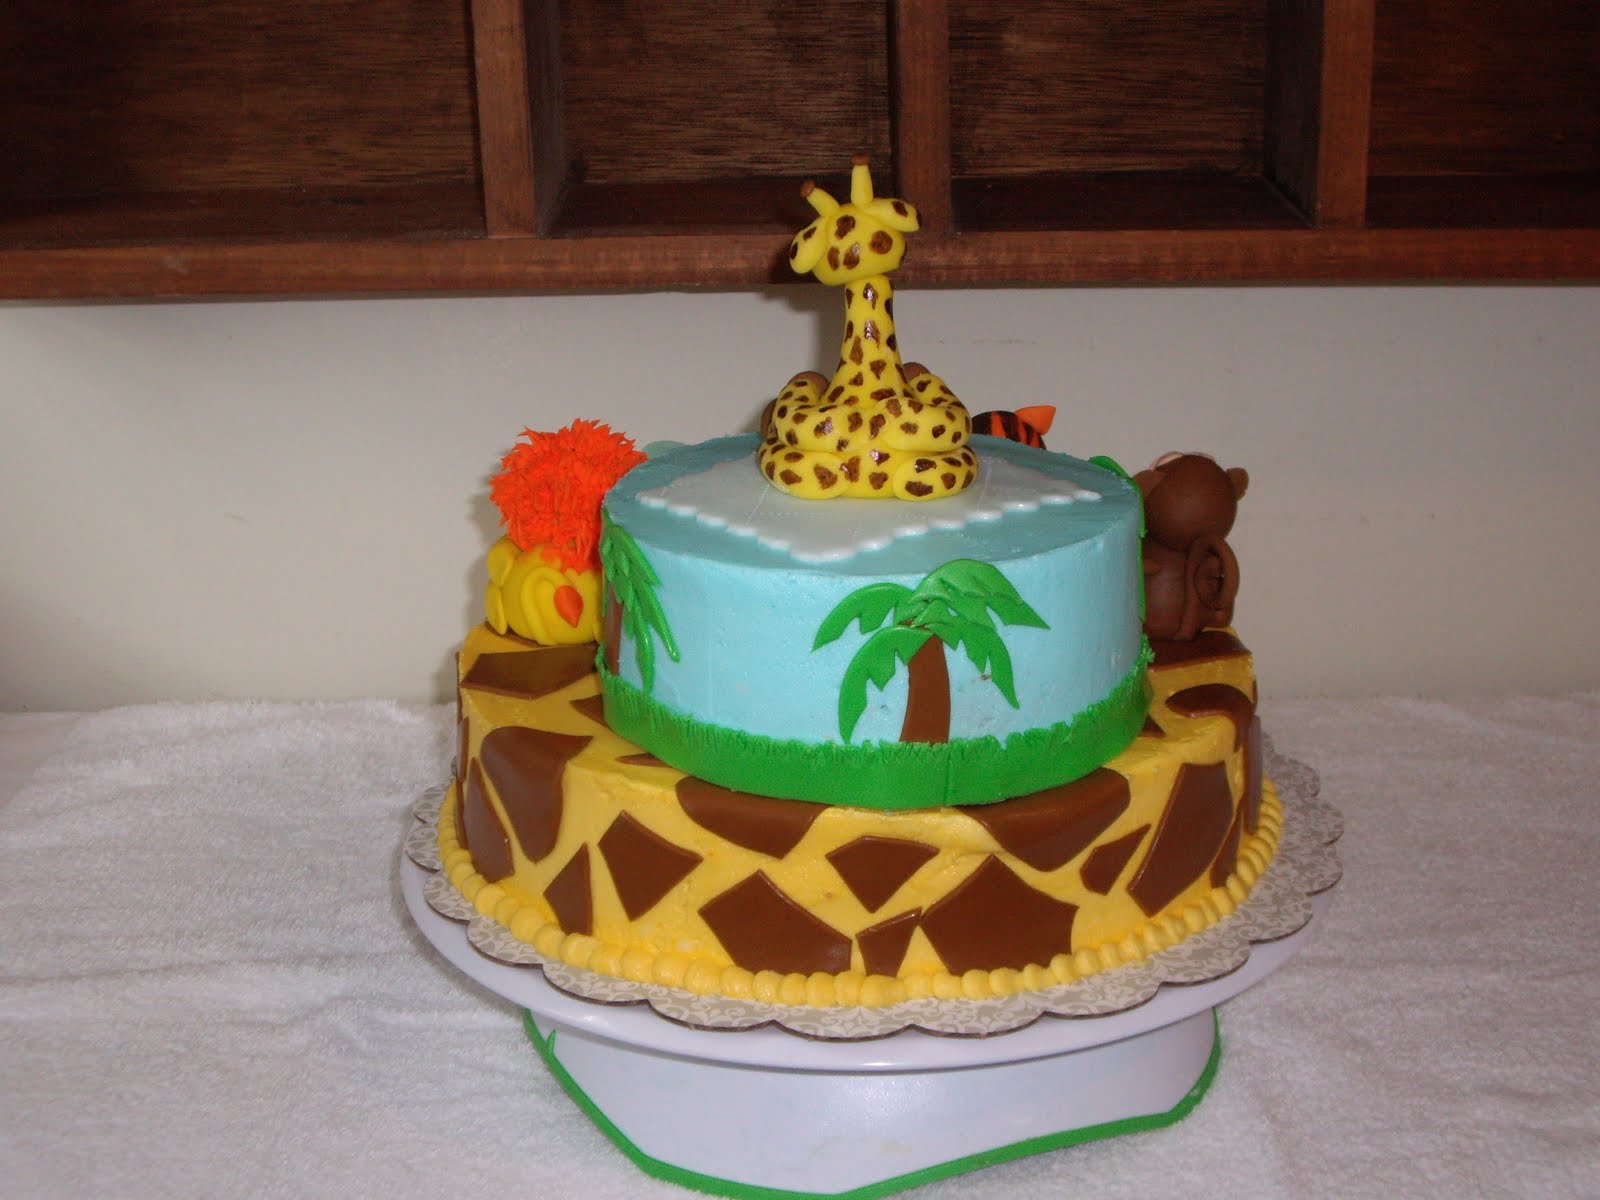 This cake was made for a baby shower that had a jungle animal theme ...